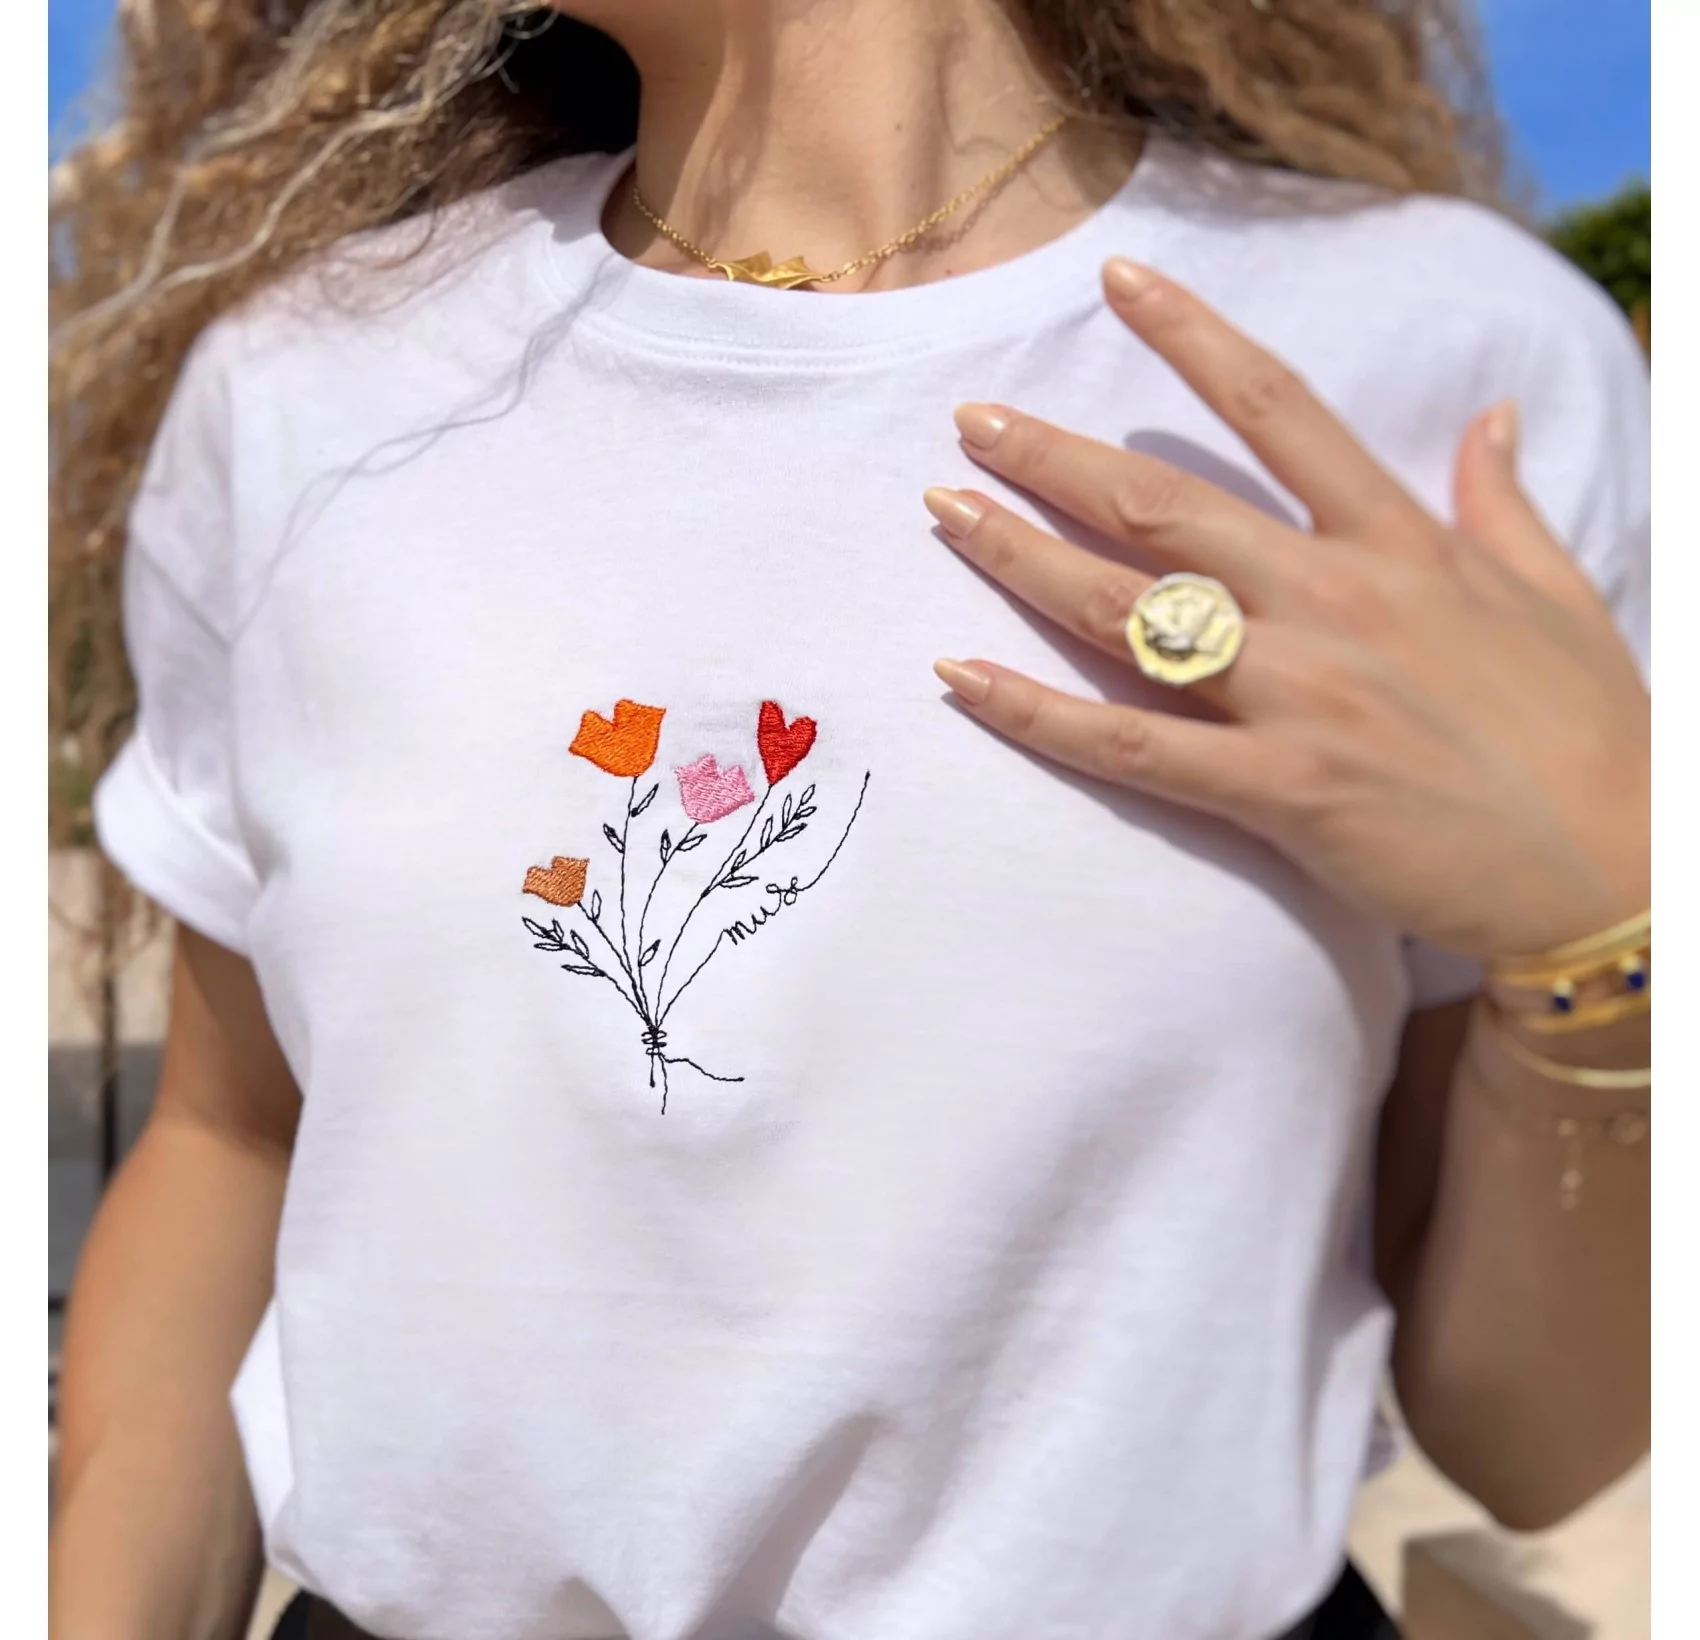 A-dam white organic T-shirt with Flying birds embroidery